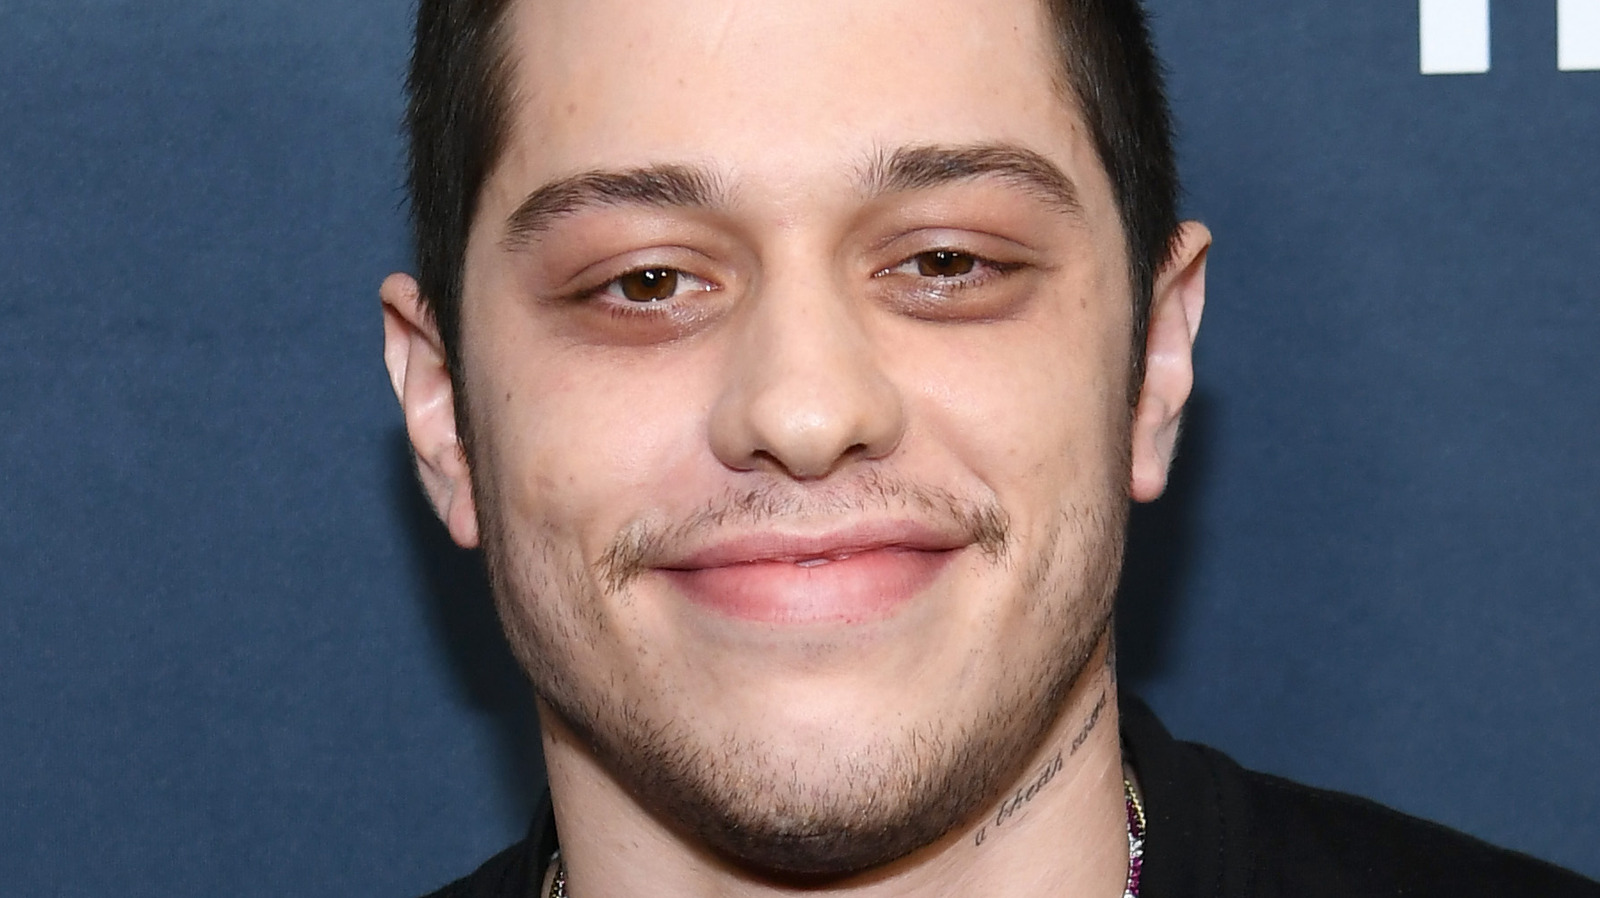 Pete Davidson reportedly doesn't feel insecure about his relationship with Kim Kardashian